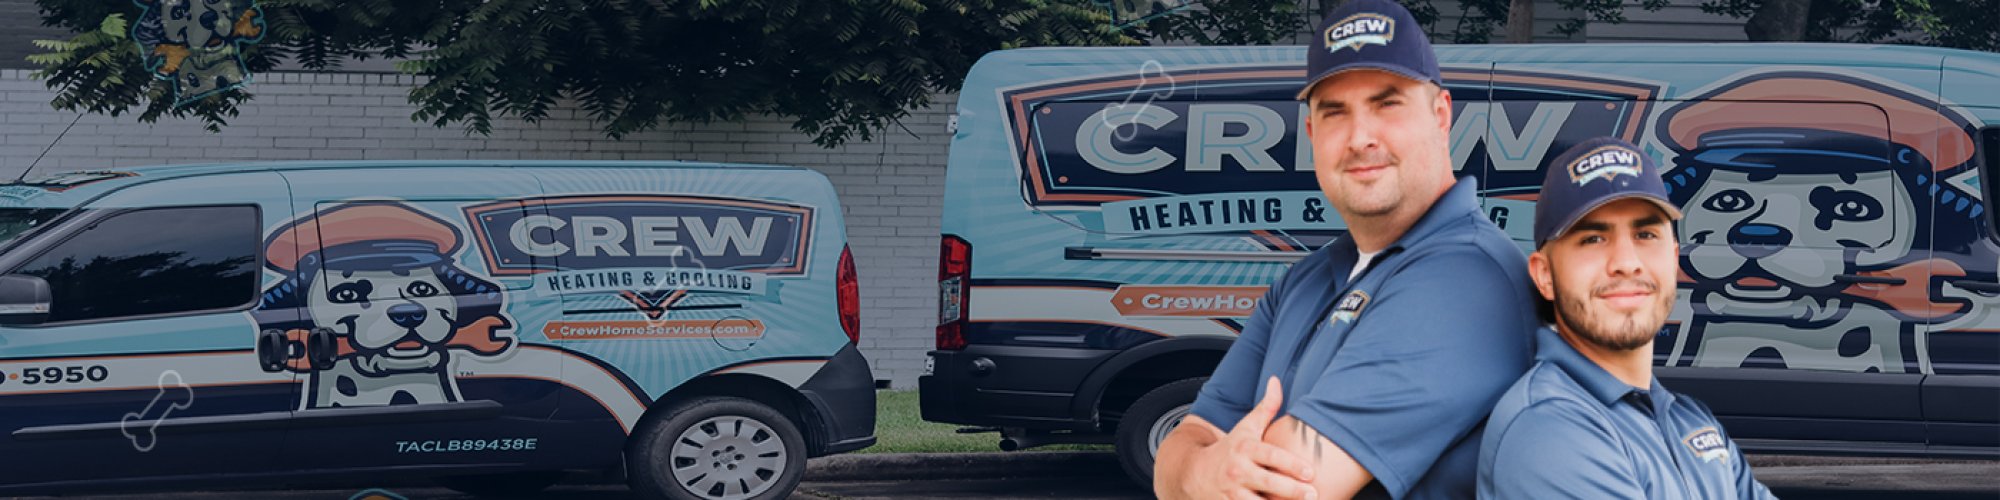 Crew Heating & Cooling